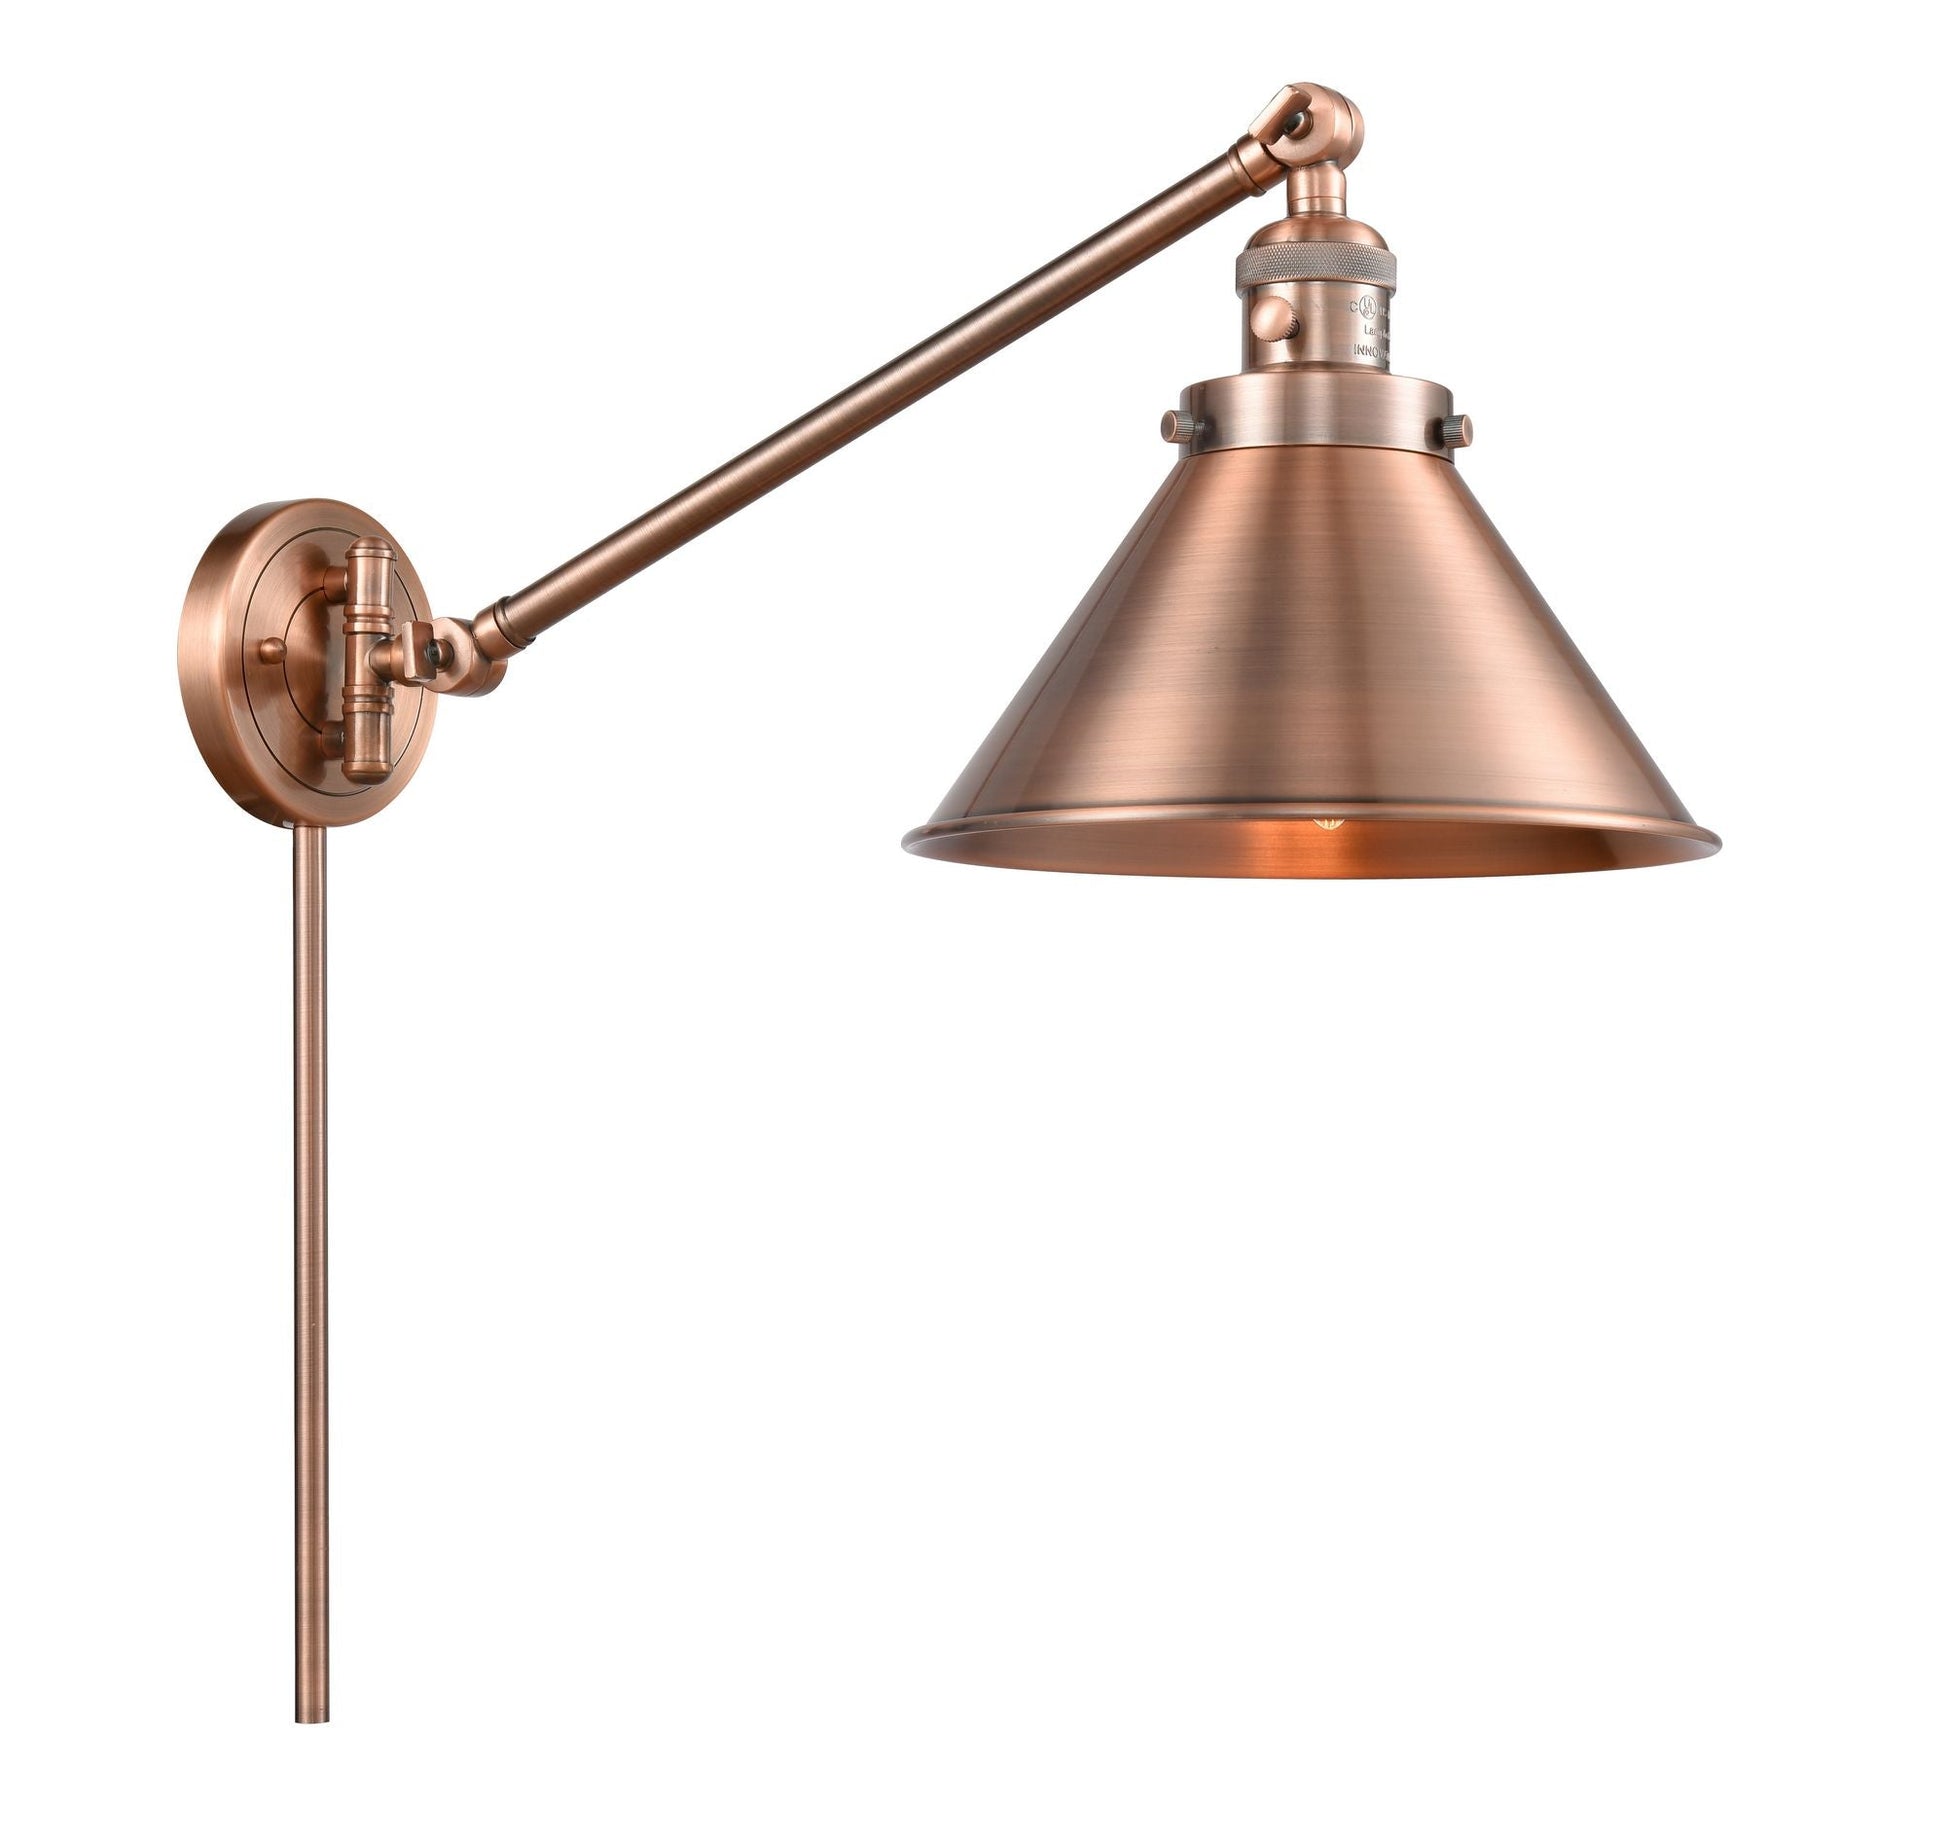 1-Light 10" Antique Copper Swing Arm - Antique Copper Briarcliff Shade - Incandesent Or LED Bulbs